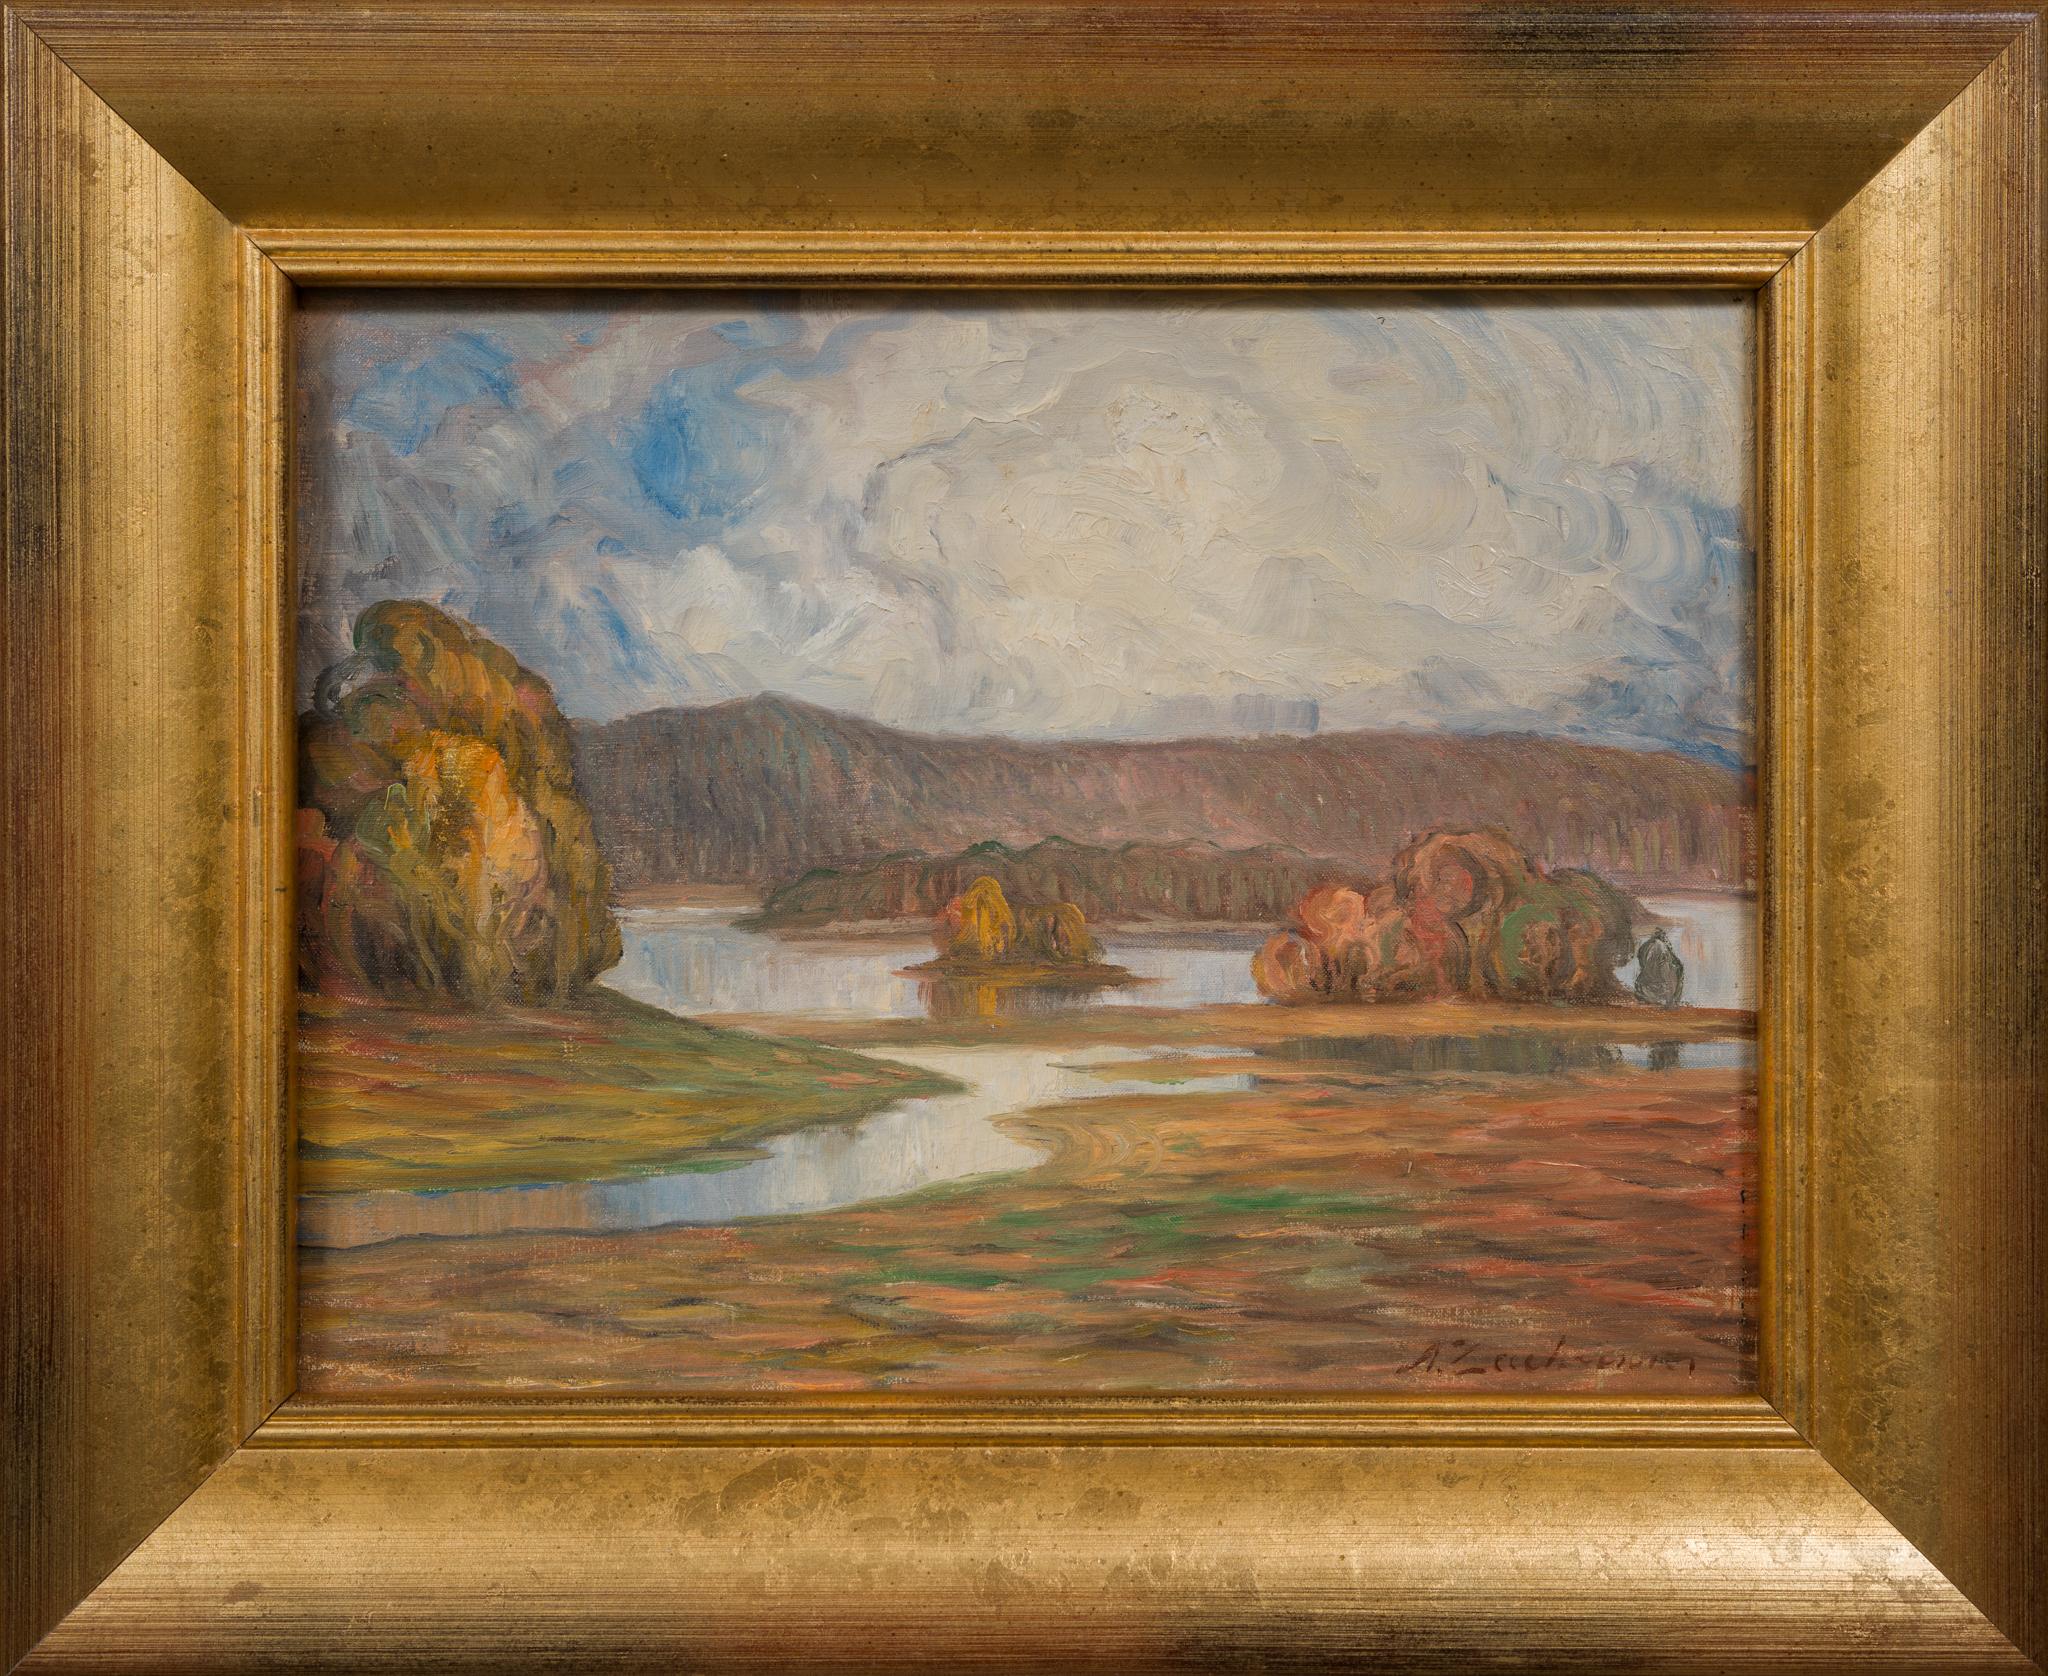 This exquisite painting by Axel Zachrisson, a Swedish artist, offers a serene glimpse into the tranquil beauty of Dalsland, Sweden. Created around 1920, the artwork captures the essence of the region's natural splendor.

The painting invites the